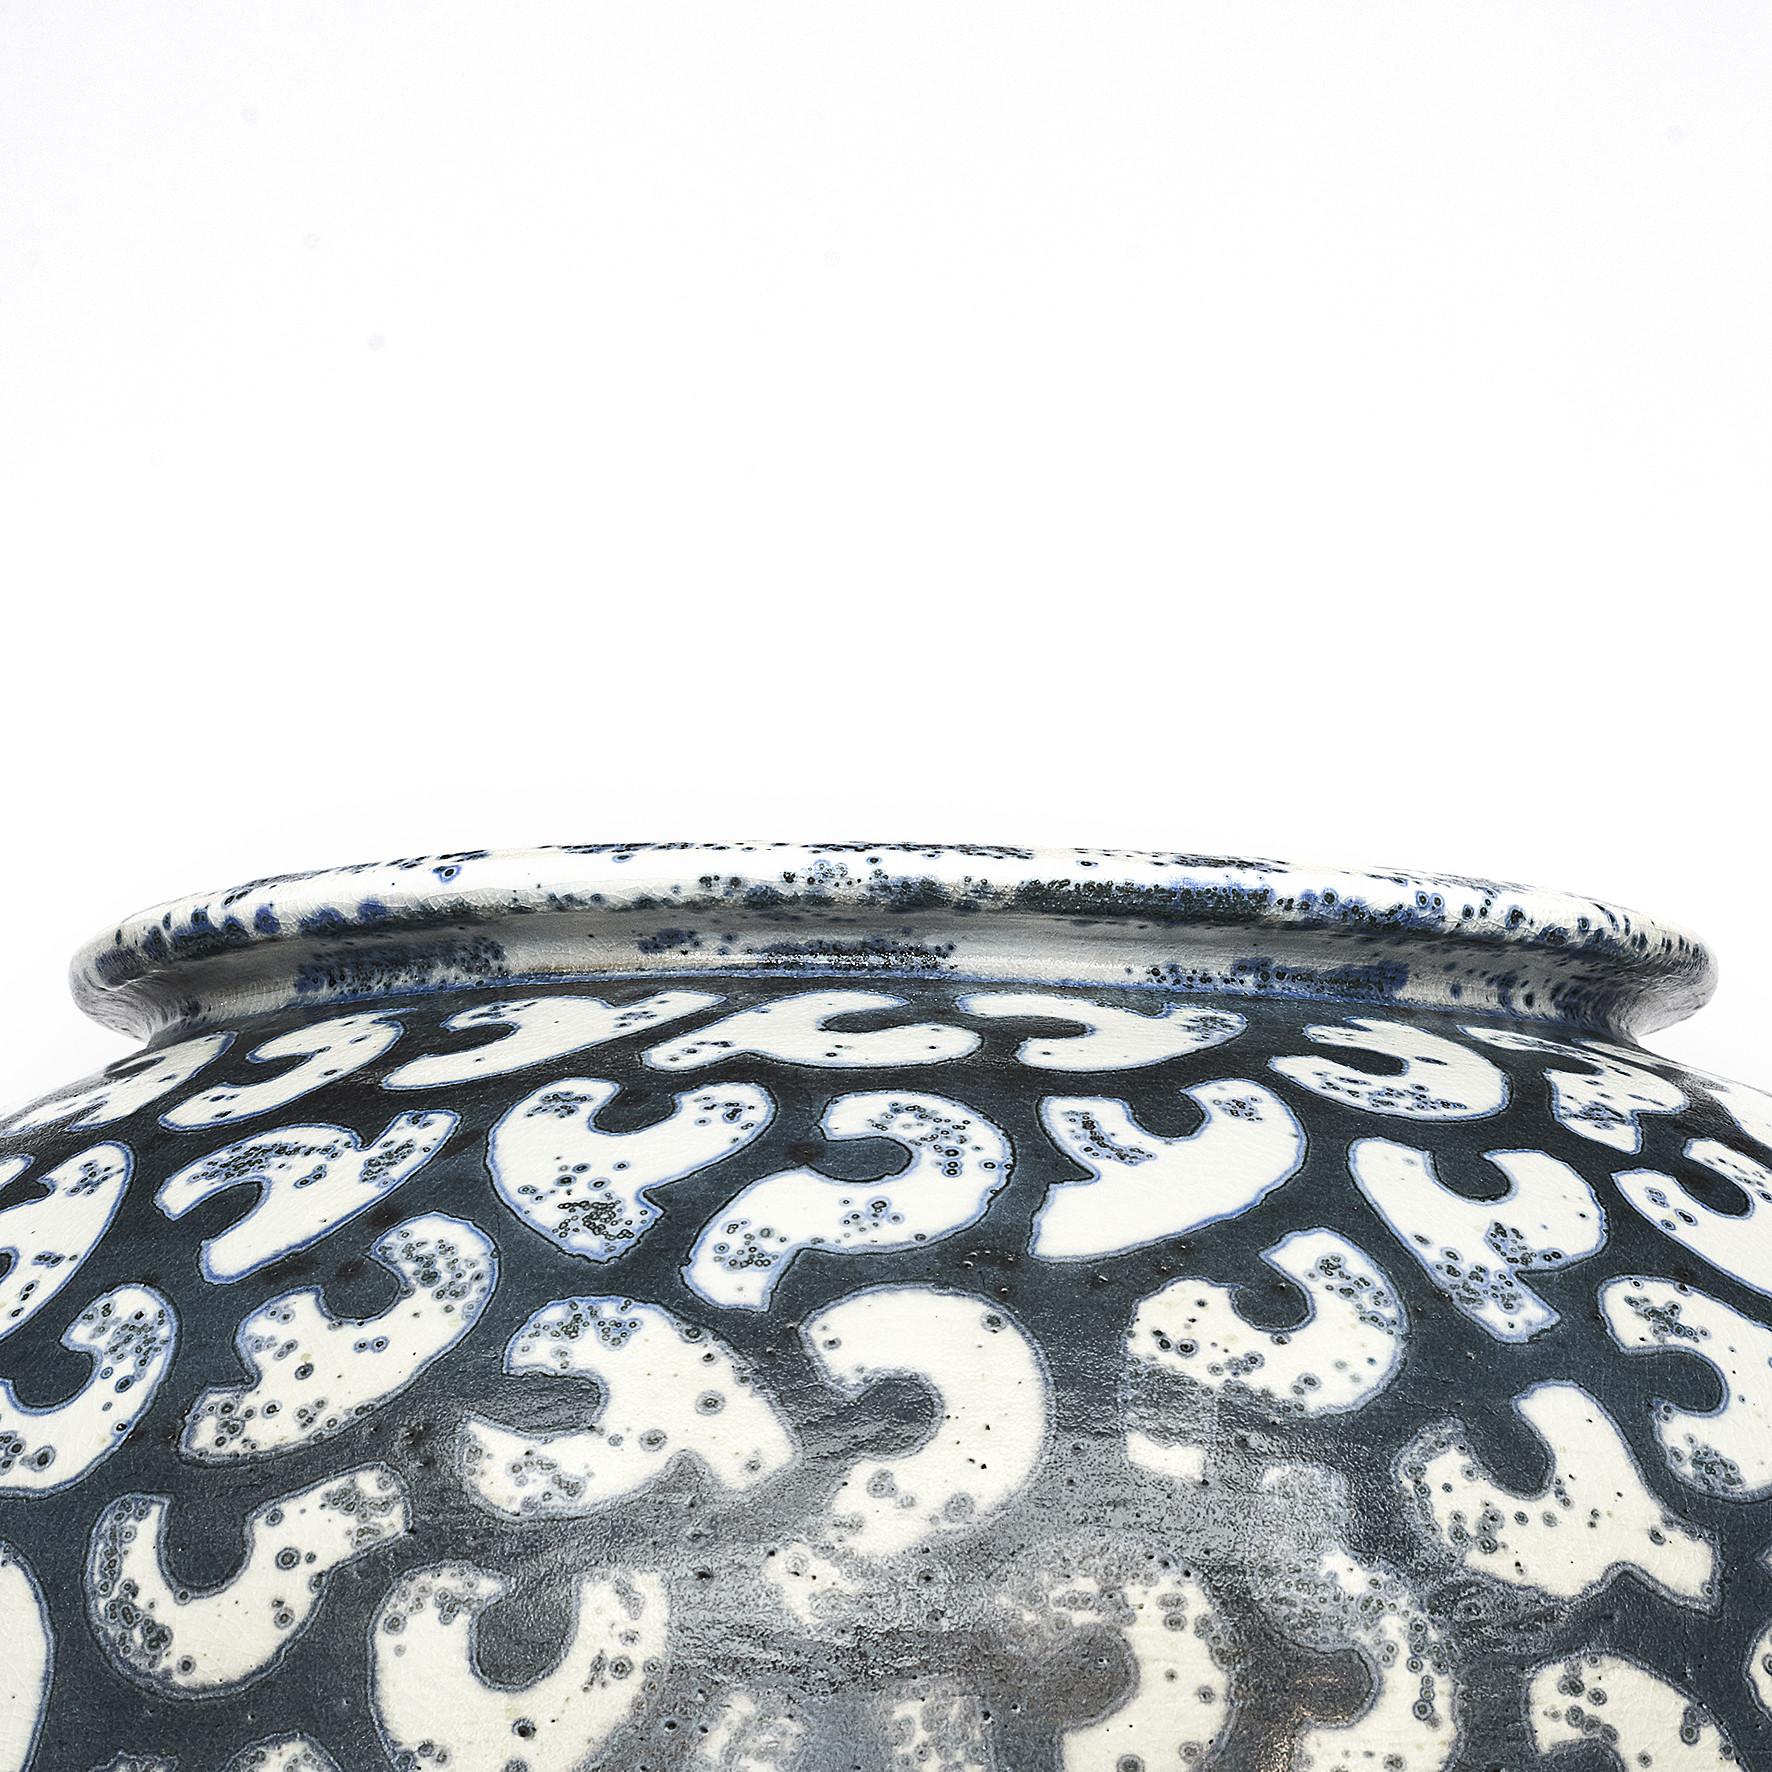 Per Weiss (Danish, born 1953) colossal stoneware floor vase with relief windings. Beautiful stoneware decorated in white, blue and dark glaze.
Artist signature stamp on rim.
Handmade, unique.